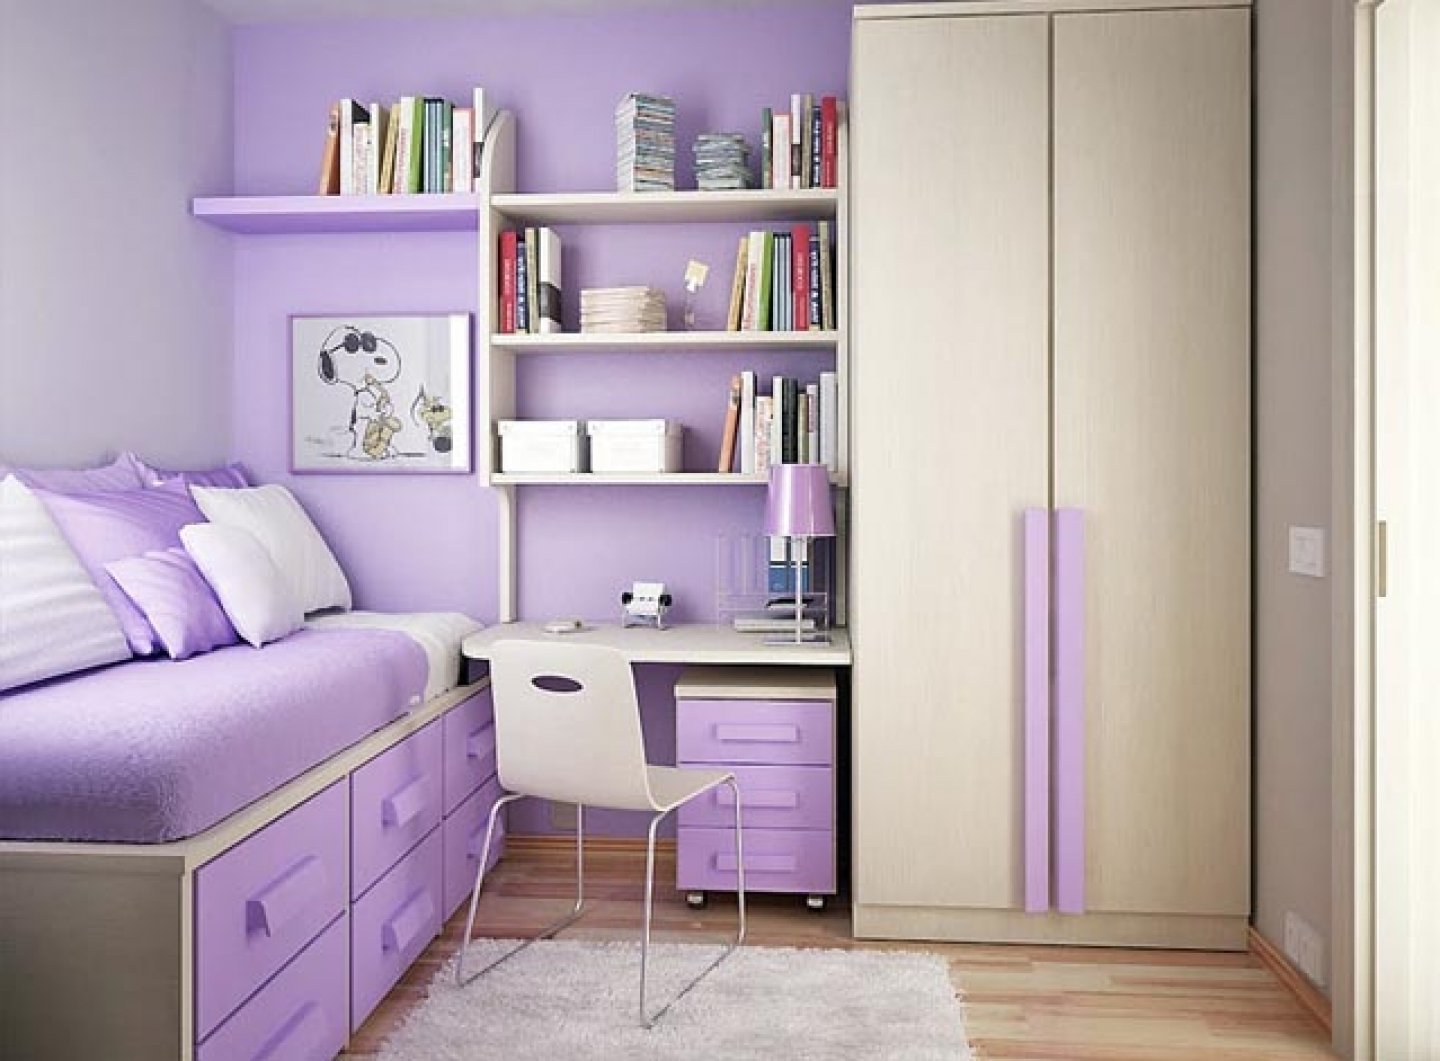 10 Most Recommended Small Bedroom Ideas For Teenage Girls teenage girl bedroom ideas for small rooms unique design purple 2022